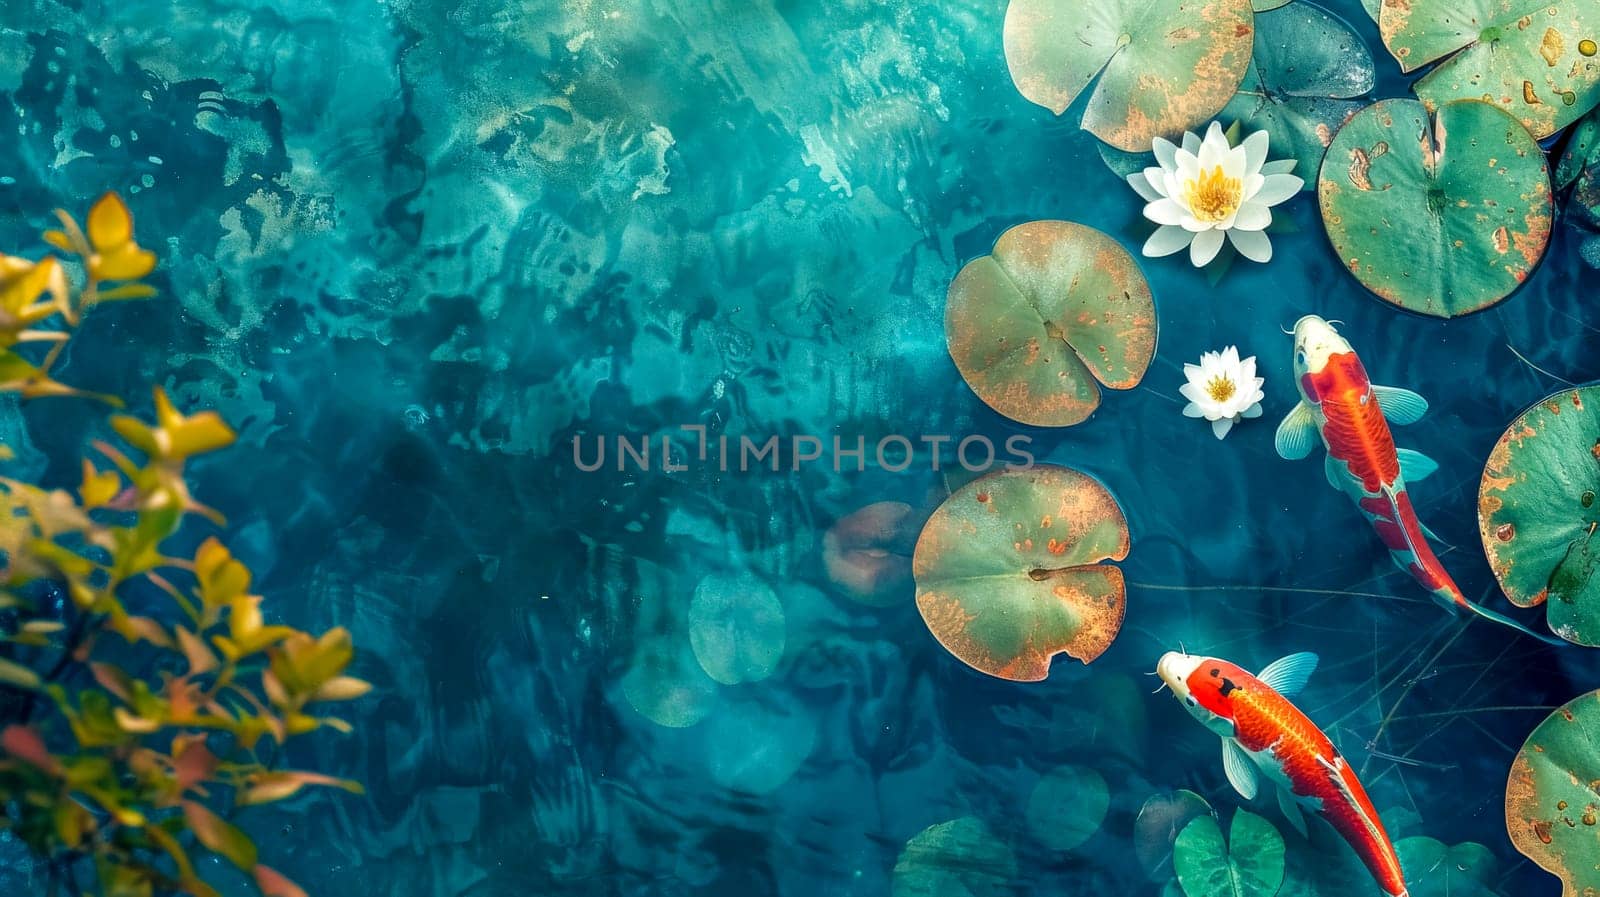 Tranquil koi pond with water lilies by Edophoto